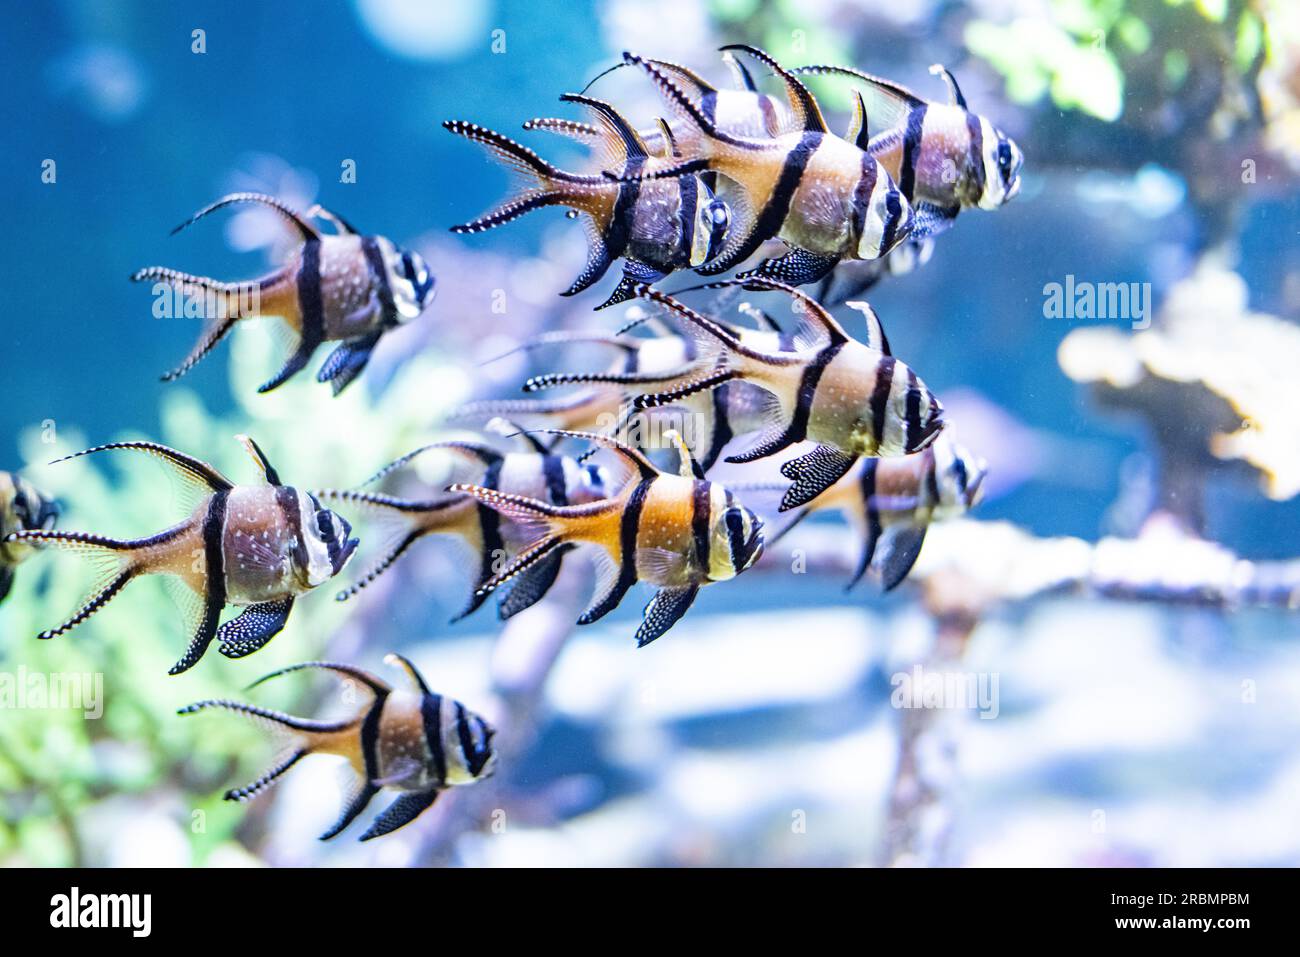 Fishes in the largest aquarium of Europe, Nausicaa, in Boulogne-sur-mer, France. Stock Photo